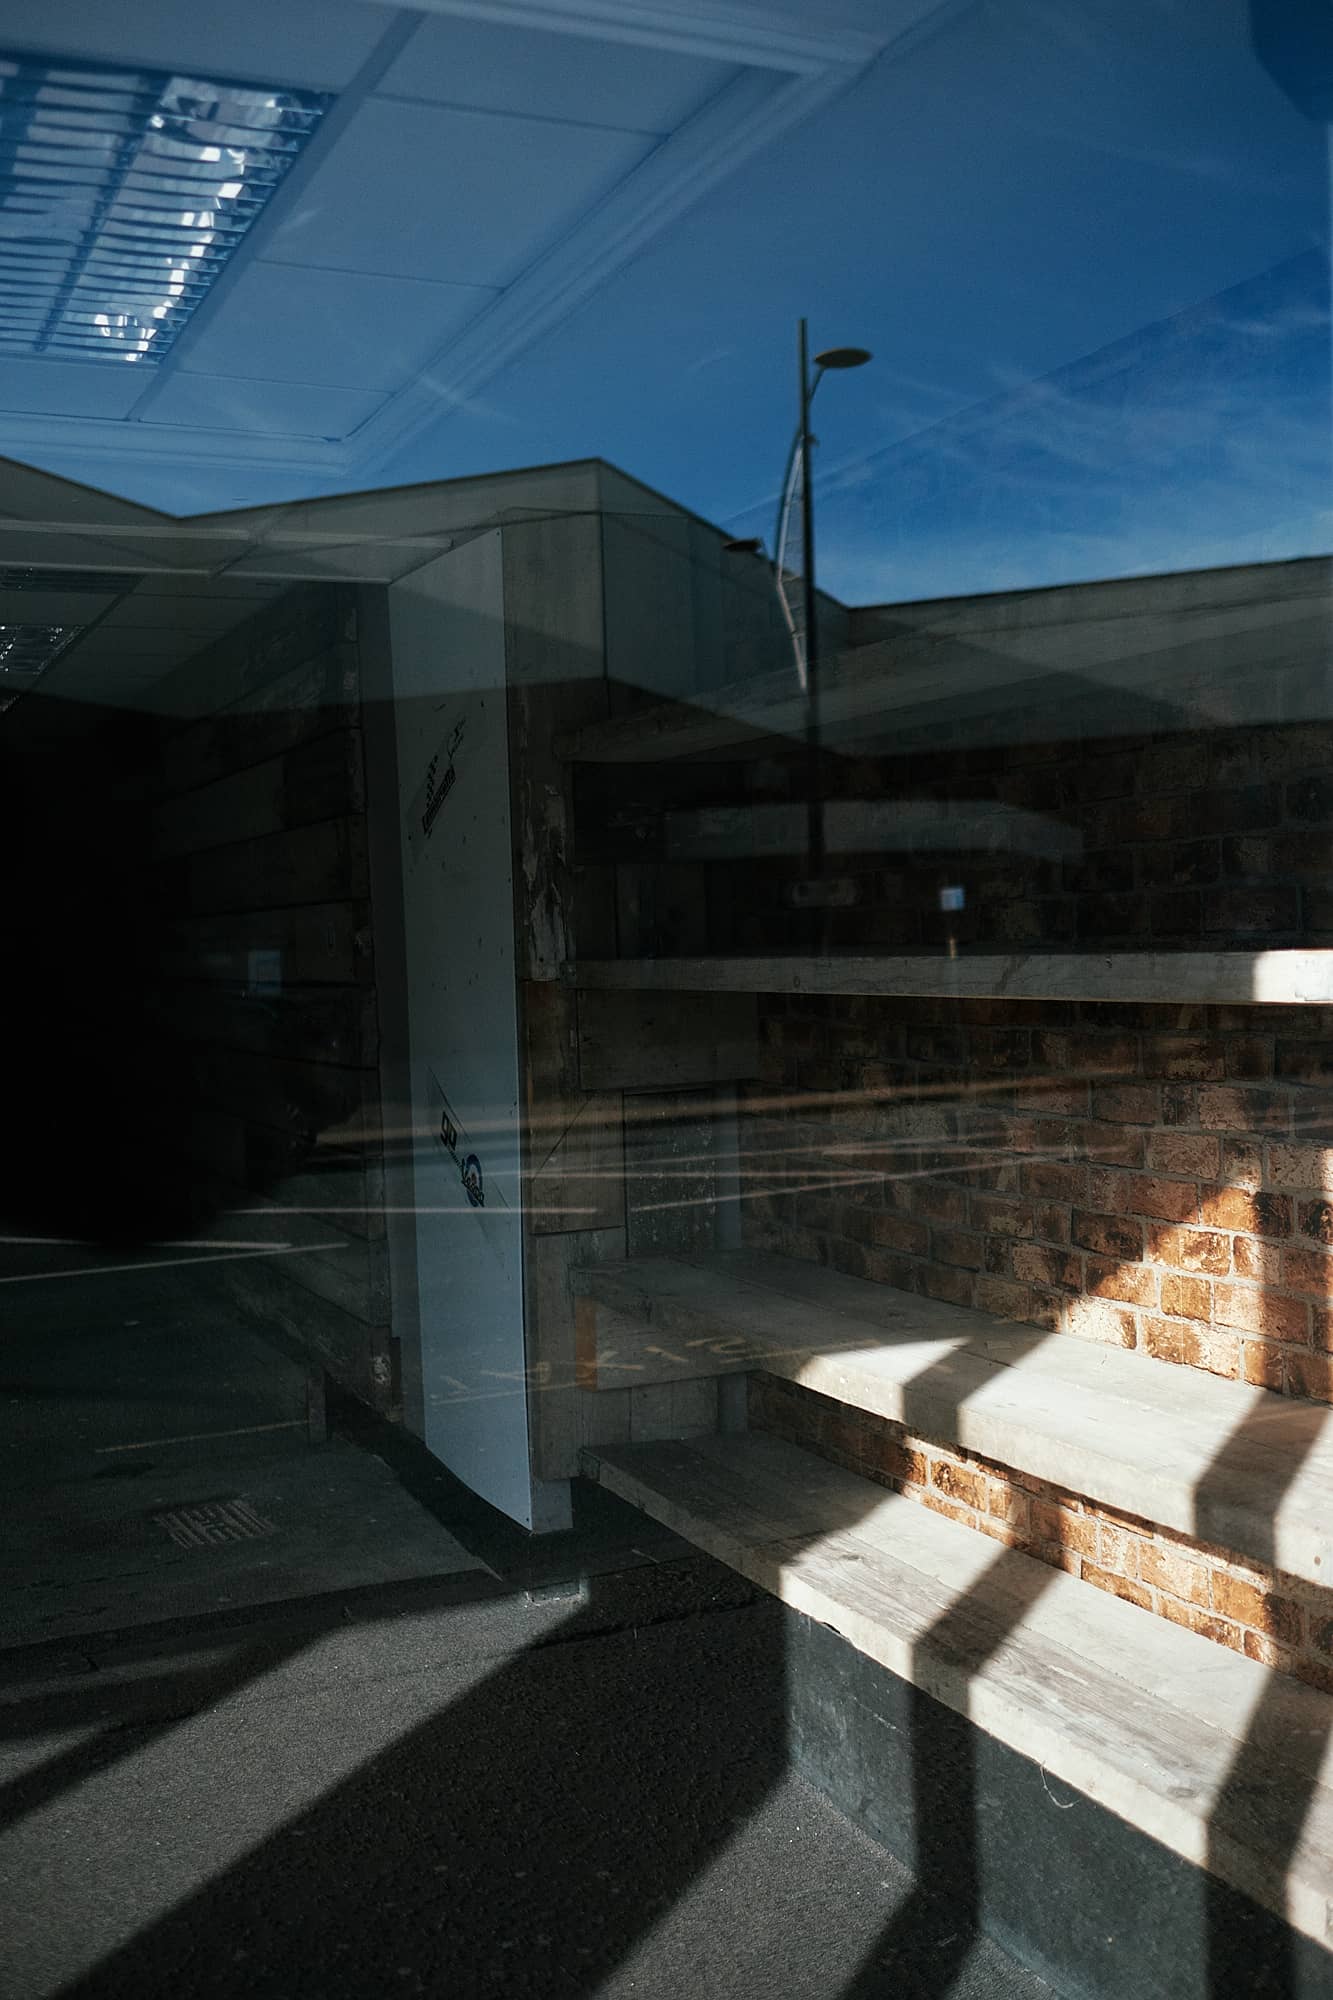 reflections and shadows in an empty shop building